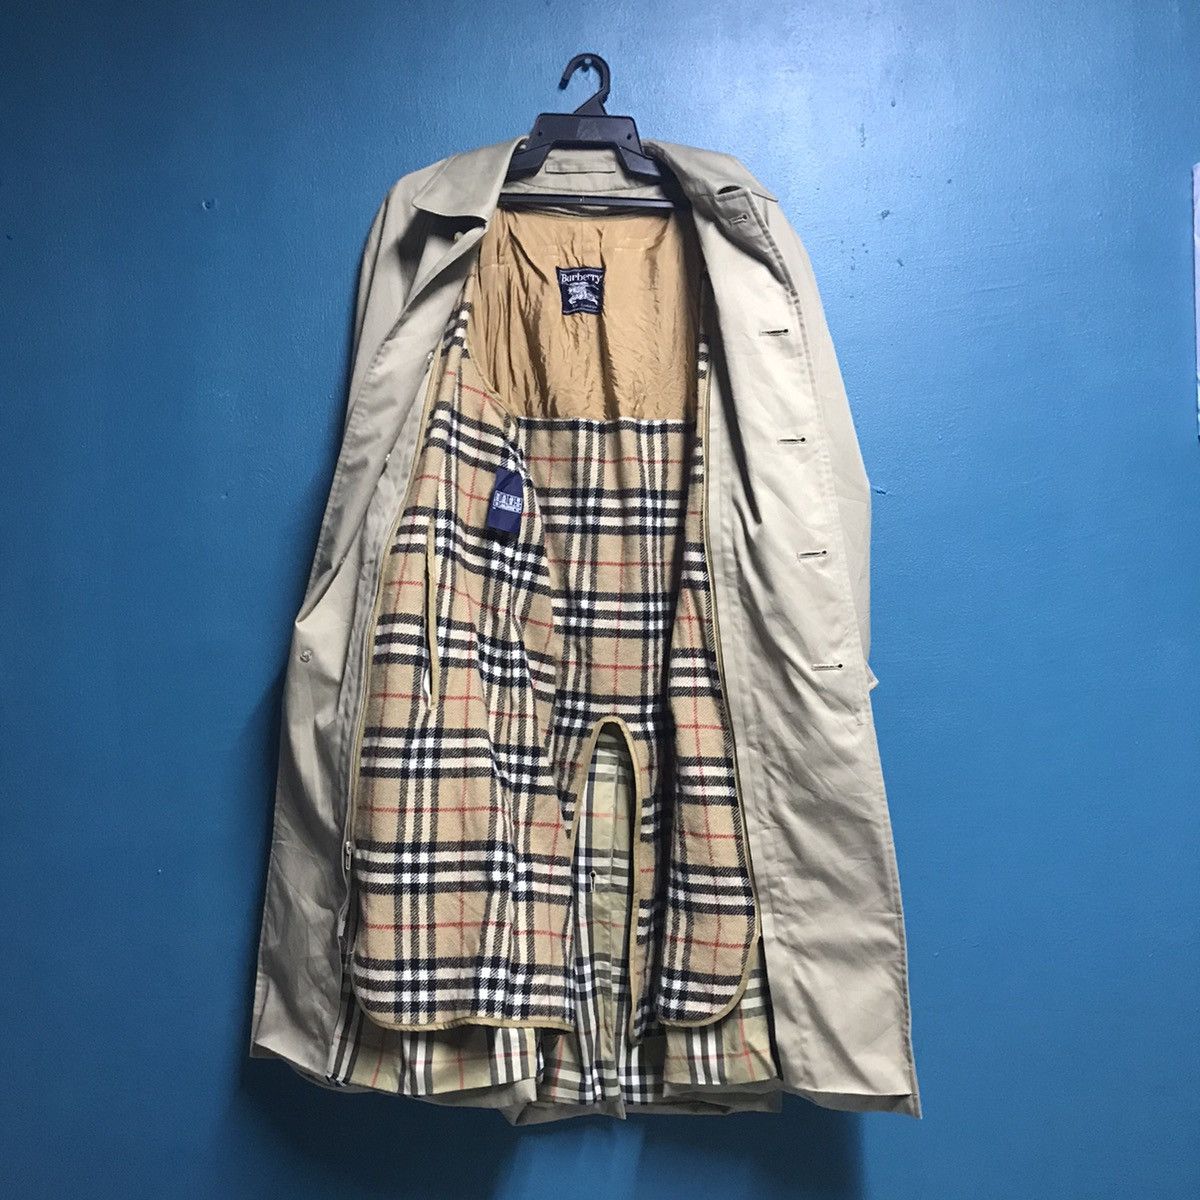 Burberry Prorsum Vintage burberry nova check trench coat with wool lining Size US L / EU 52-54 / 3 - 4 Thumbnail